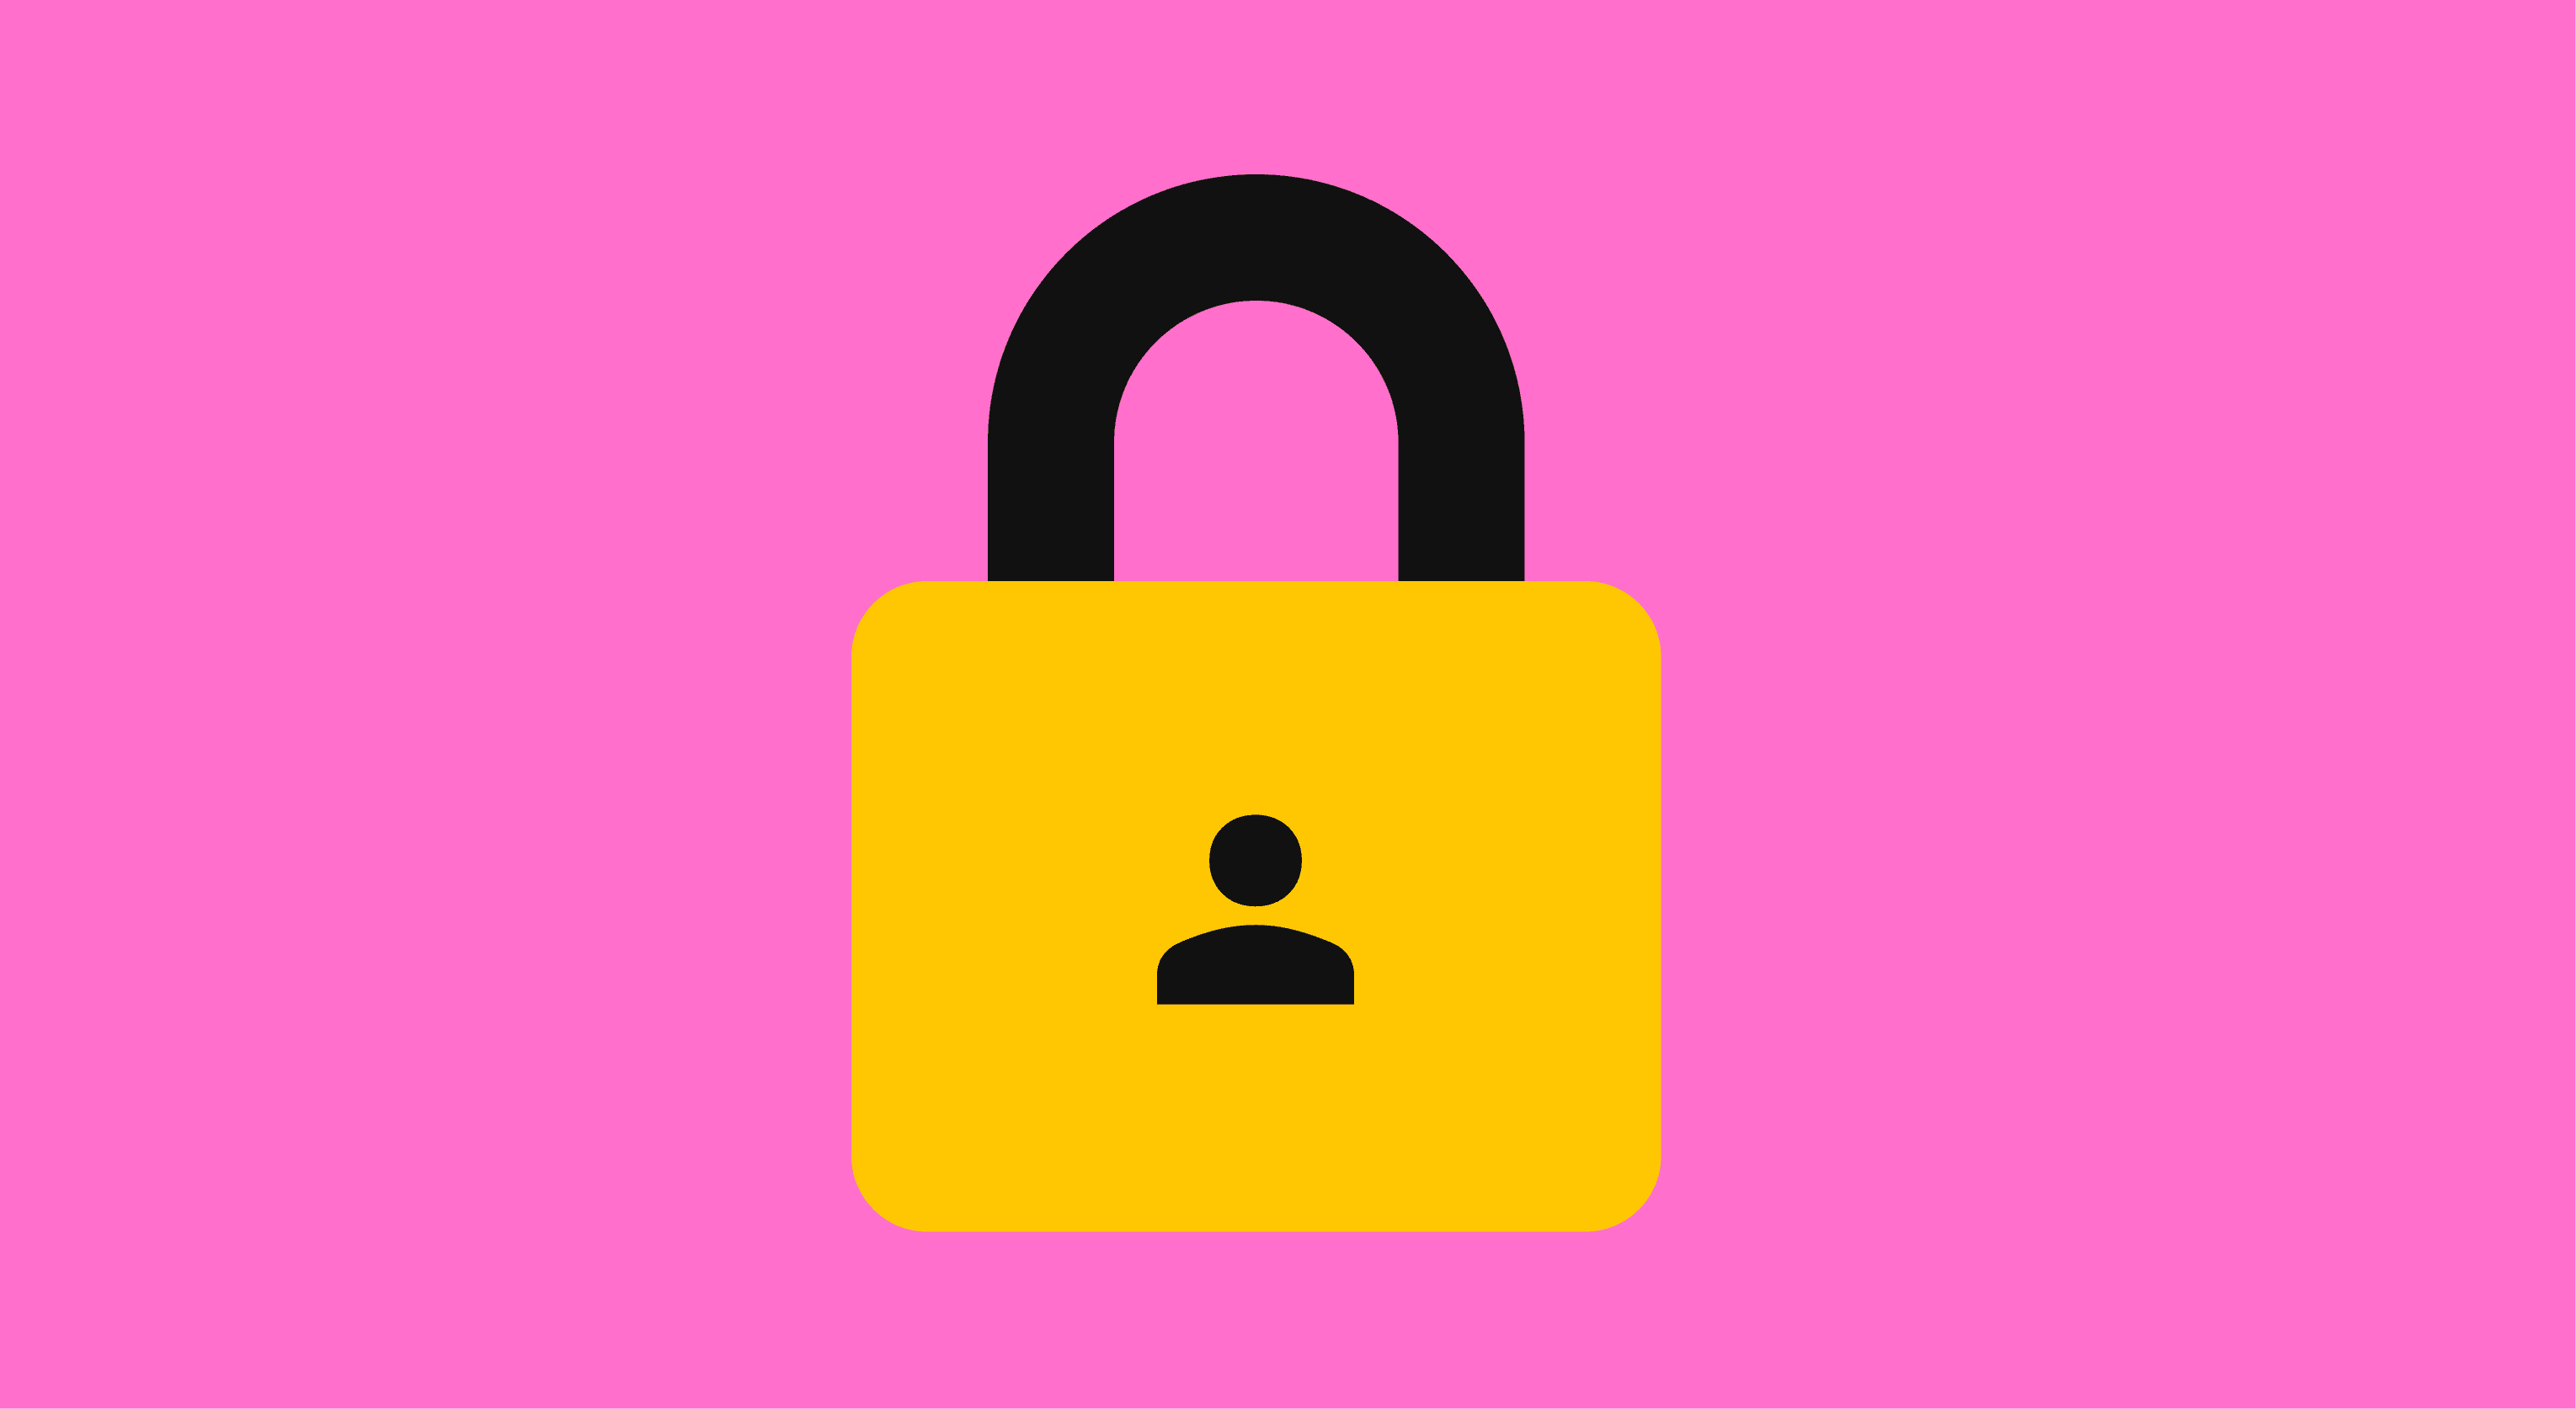 Illustration of padlock with person icon at center